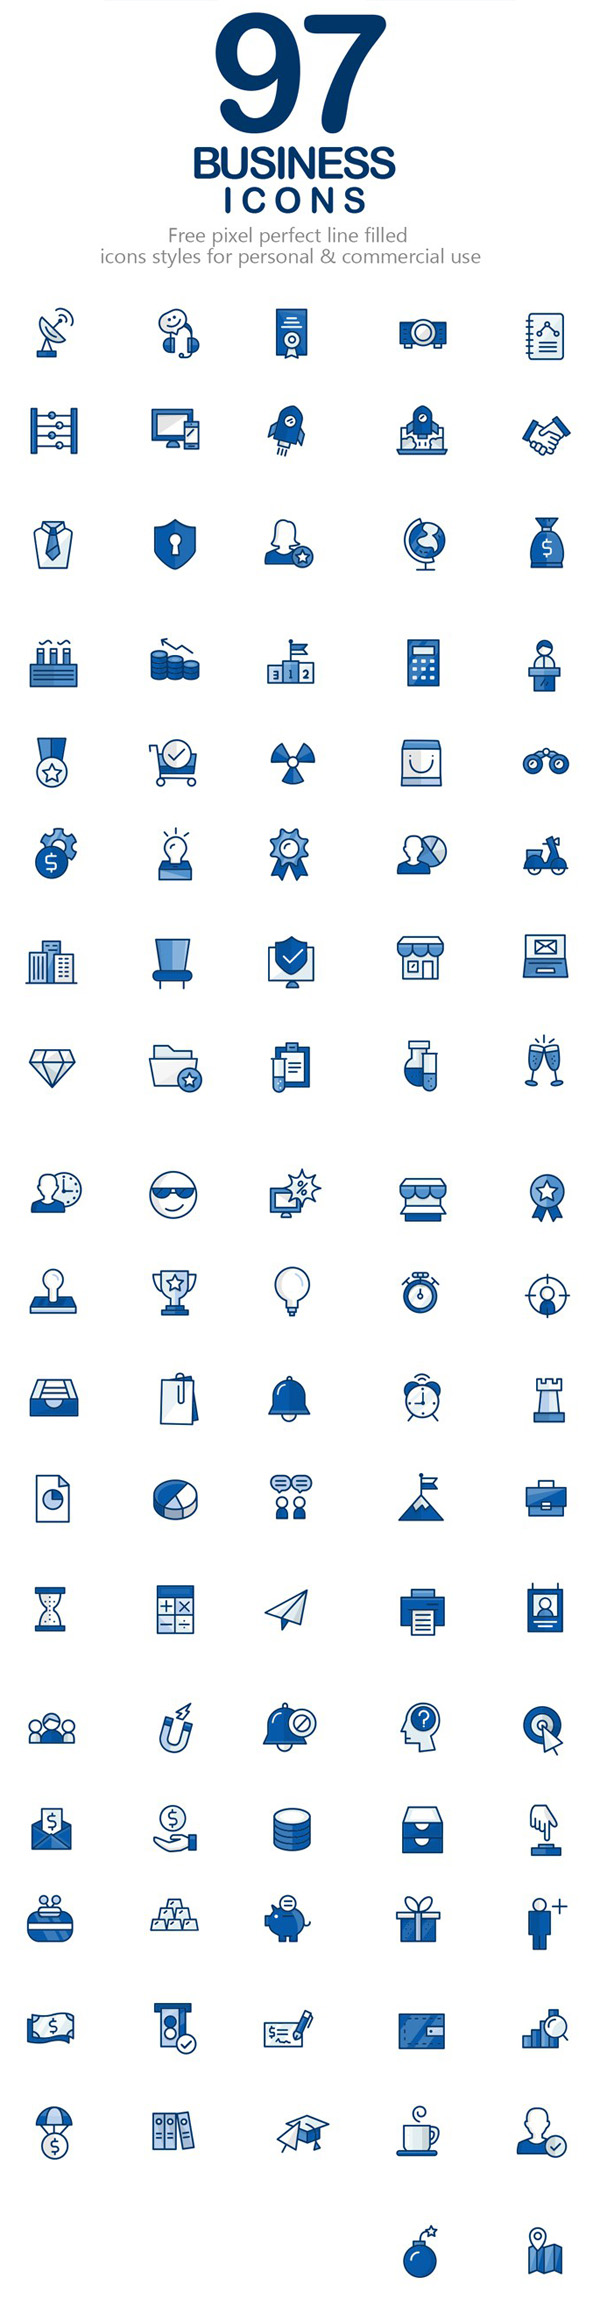 Free Business Vector Icons (97 Icons)